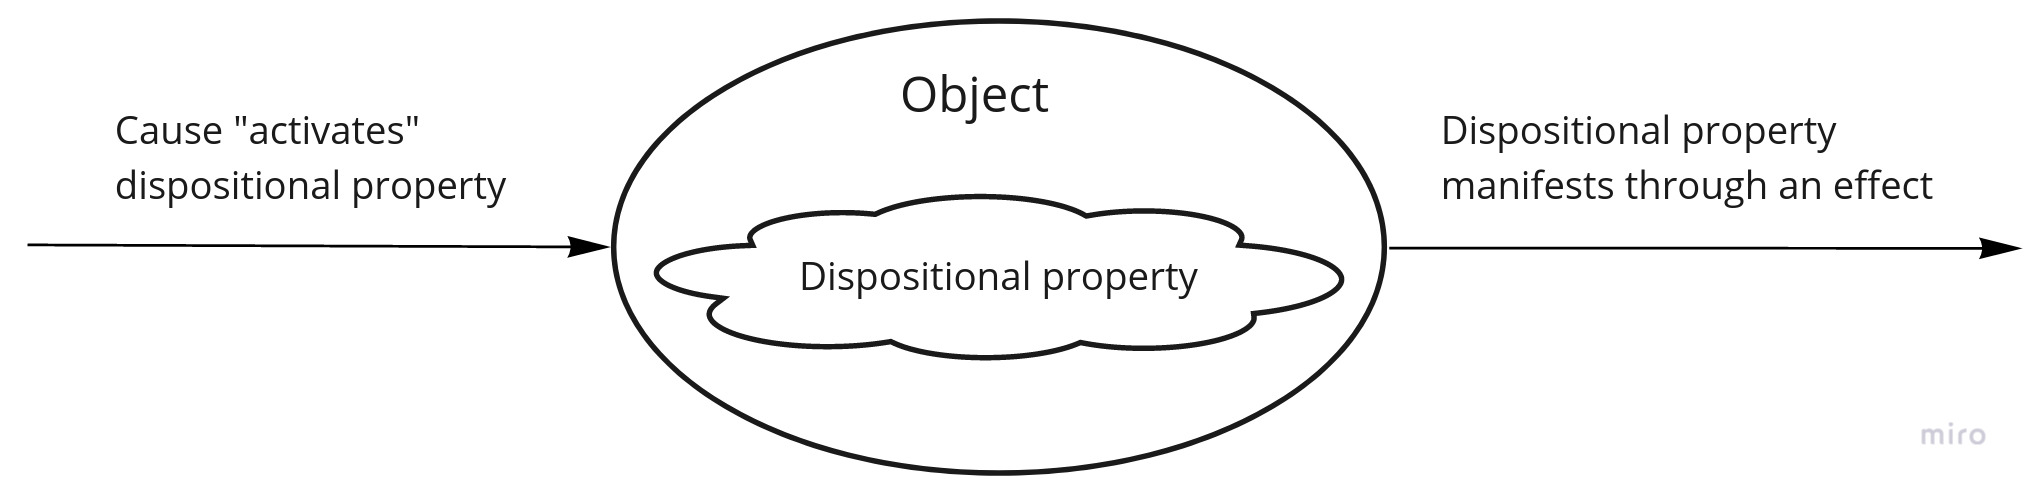 Cause activates dispositional property, effect is a manifested property